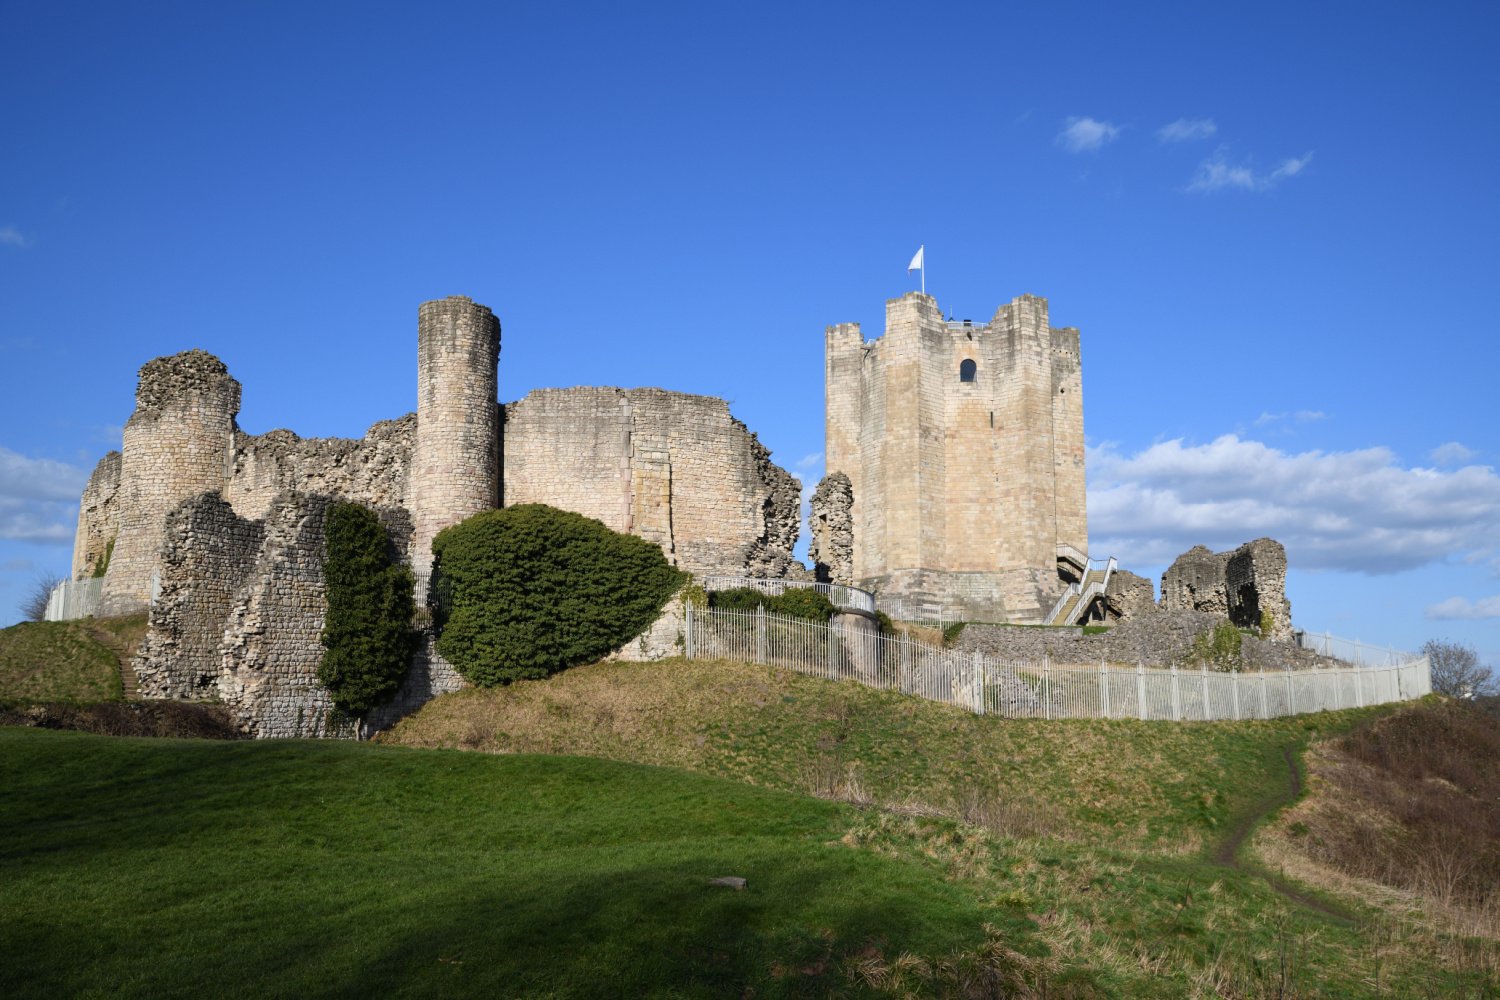 Image name conisbrough castle near doncaster south yorkshire the 17 image from the post A look at the history of Conisbrough Castle, with Dr Emma Wells in Yorkshire.com.